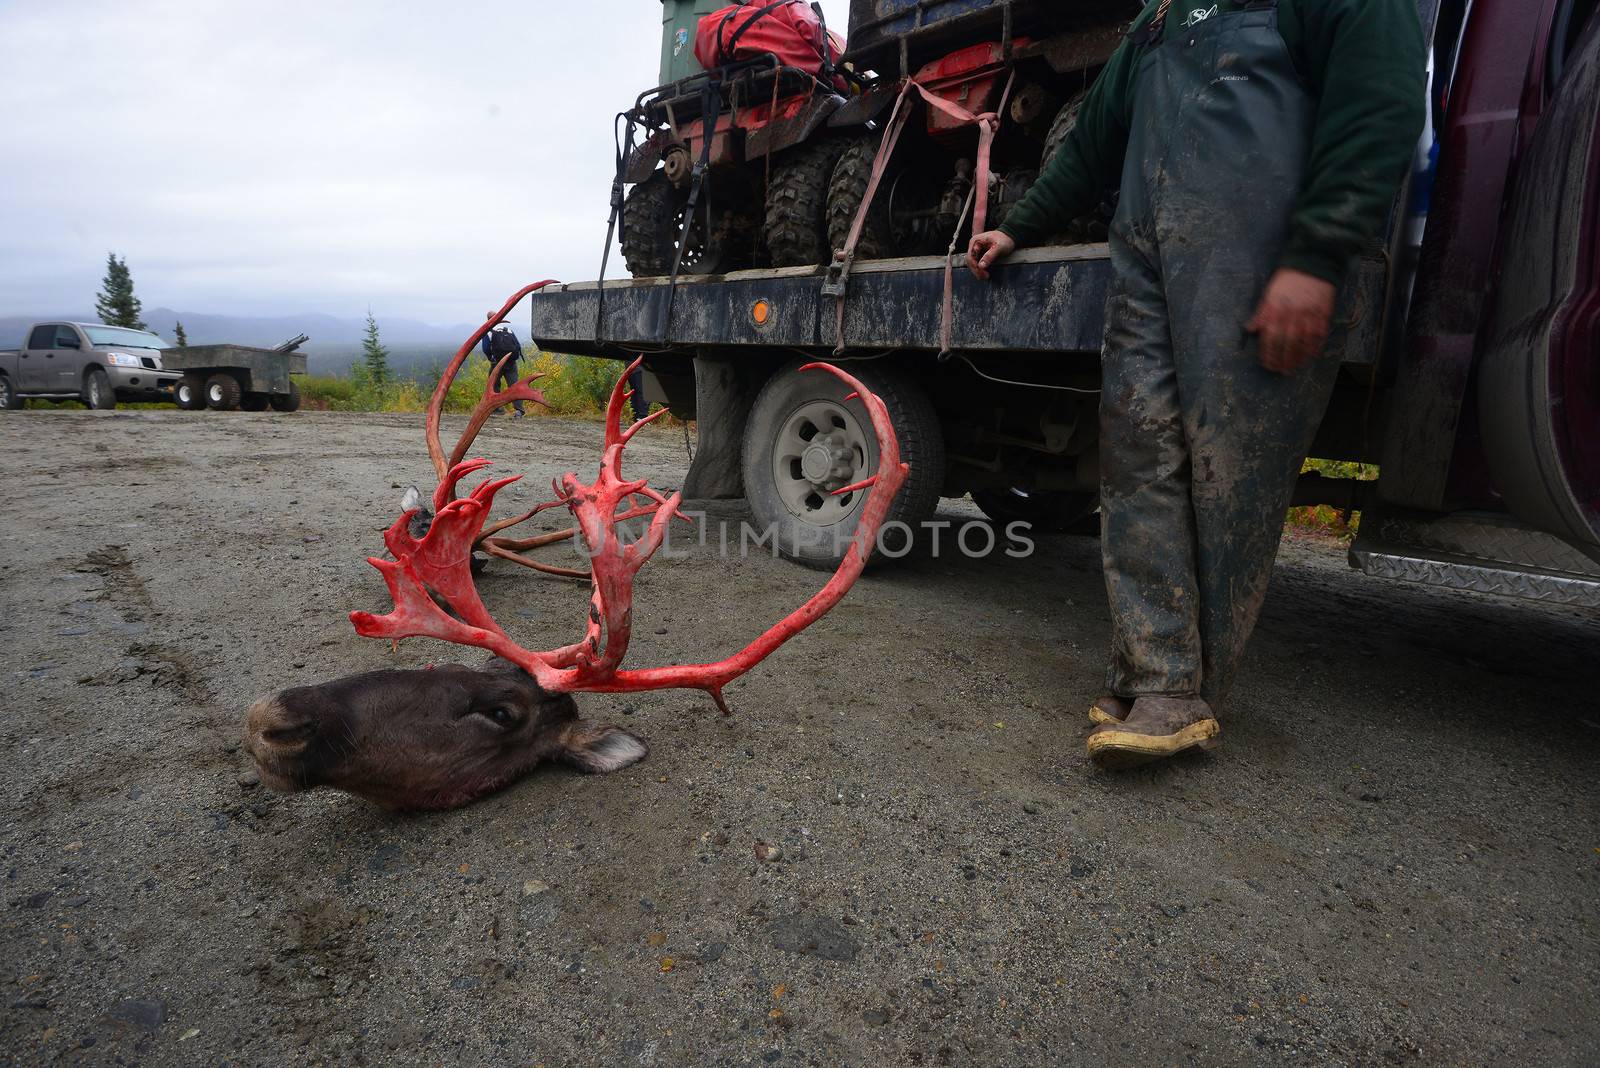 dead caribou from hunting in alaska